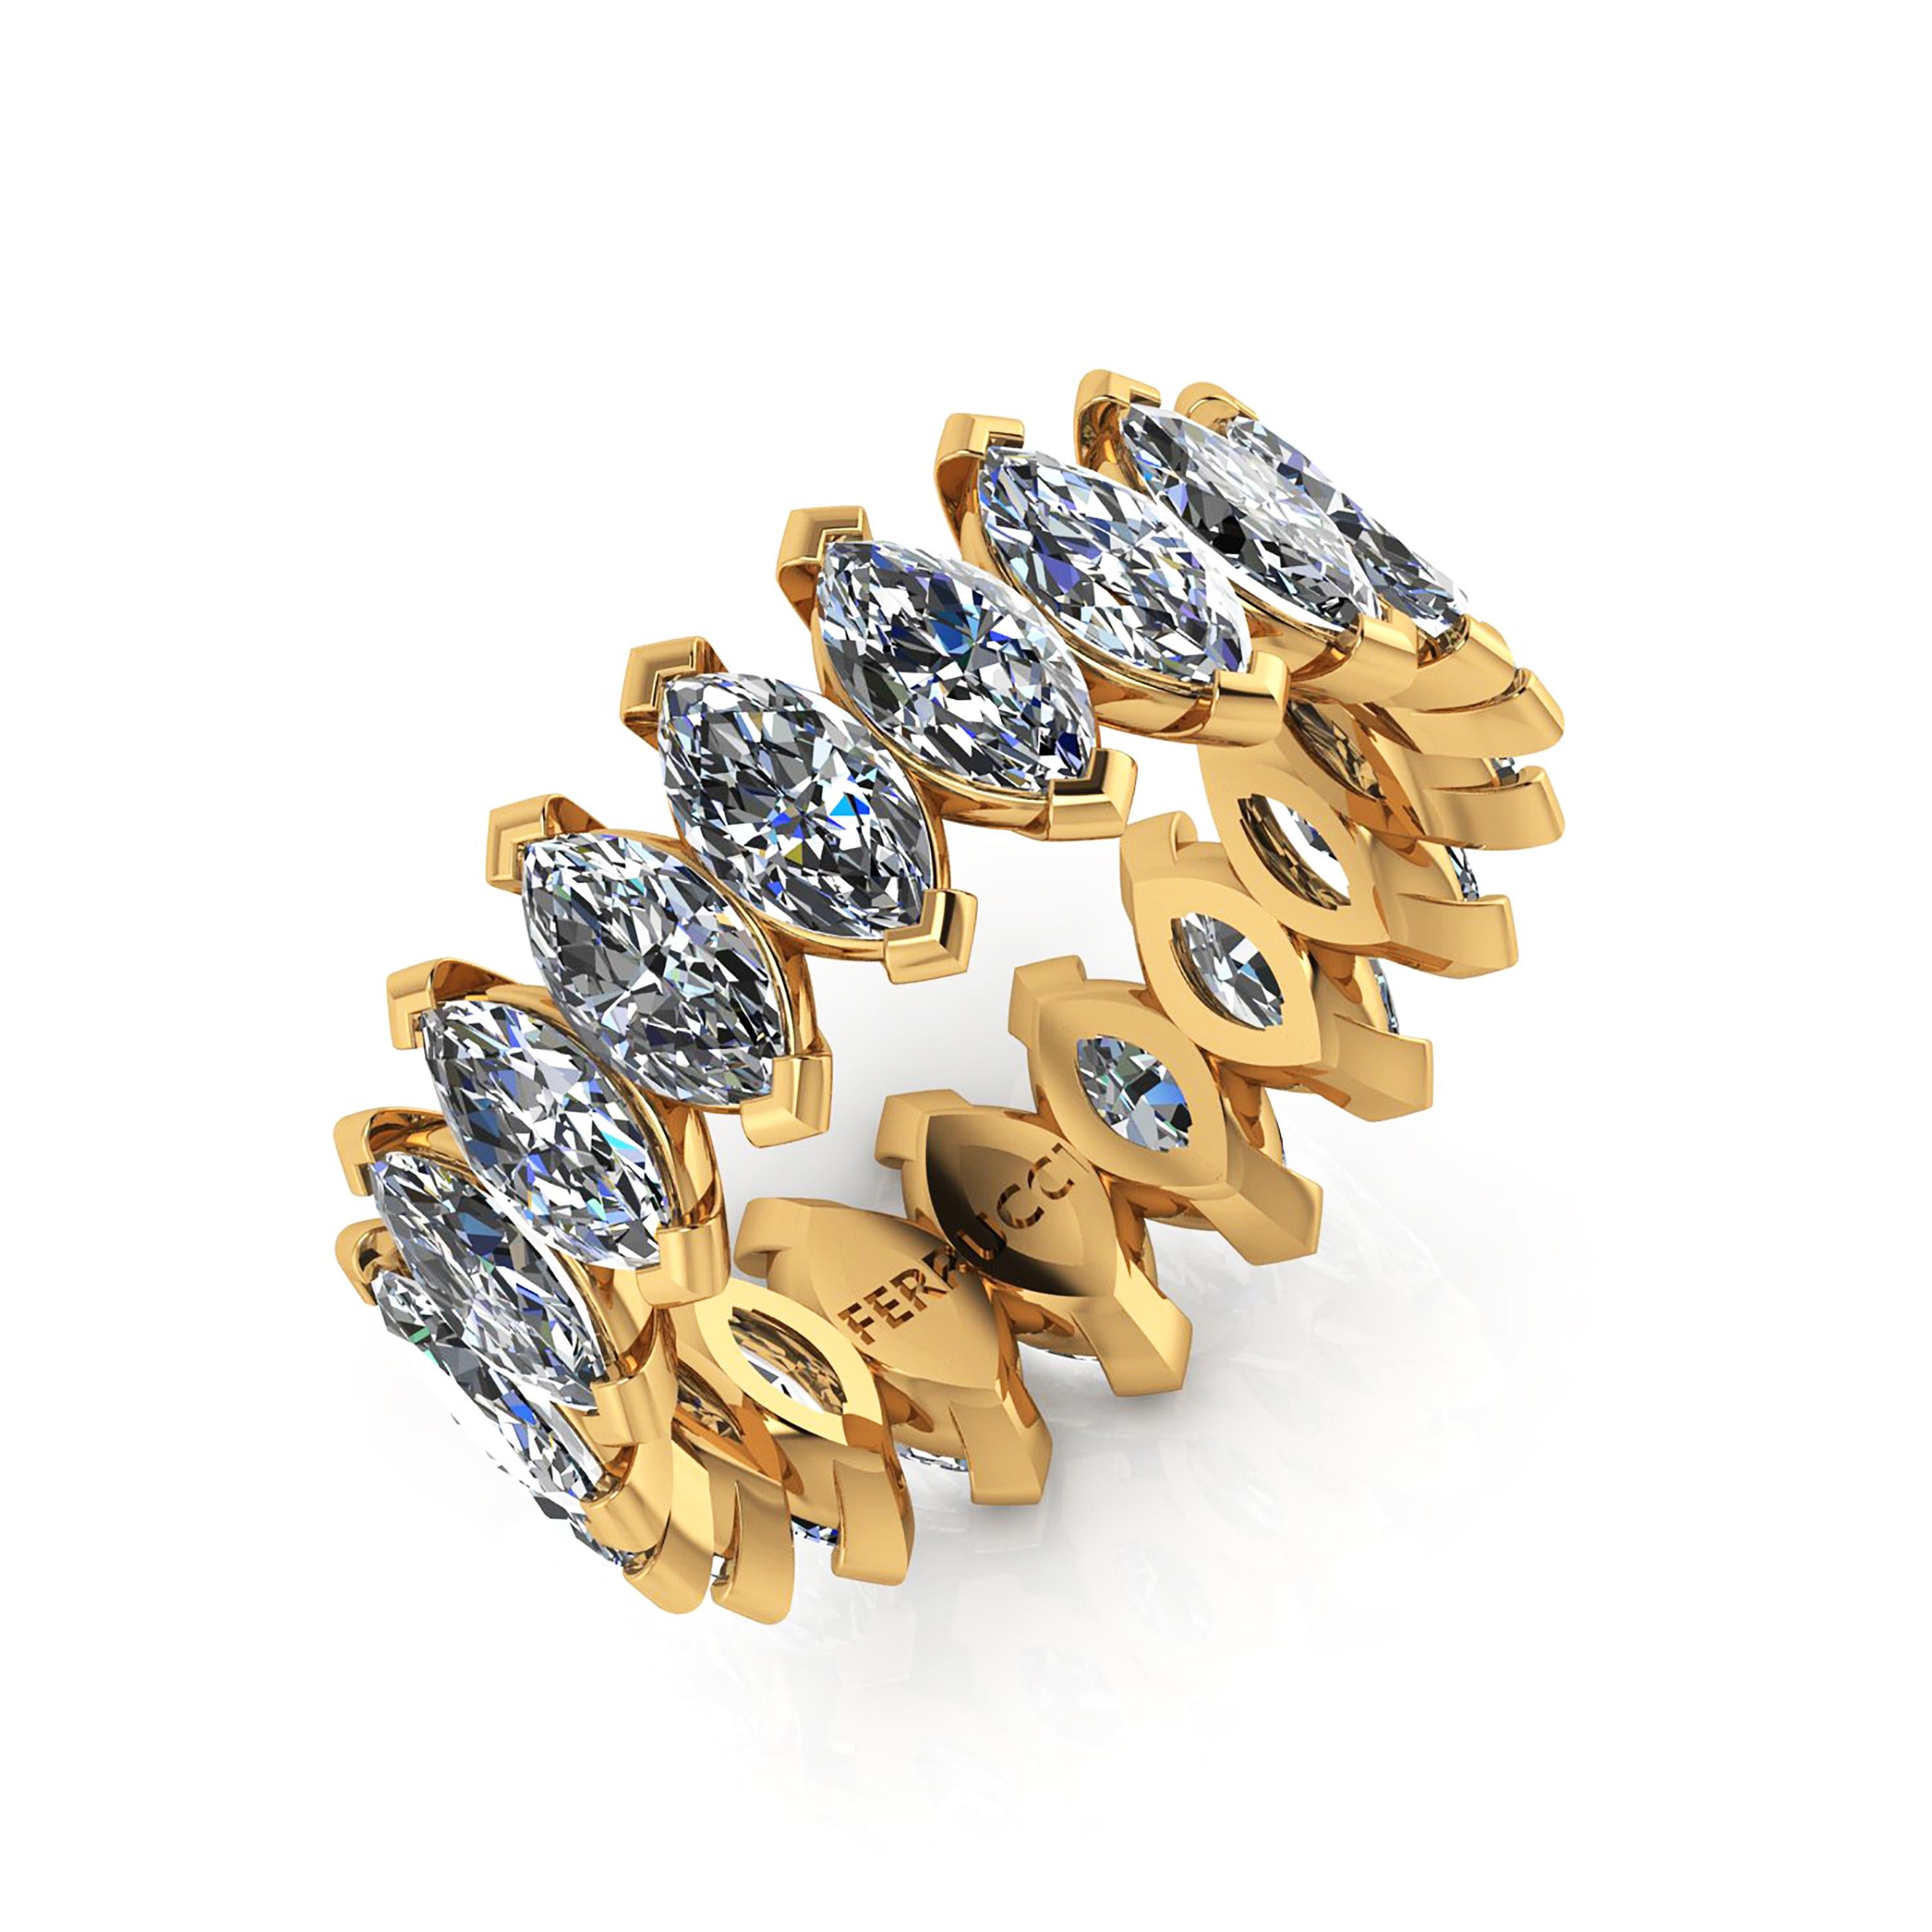 A classic FERRUCCI 4.70 carats of bright white diamonds G color, VS clarity, set to perfection in a hand crafted 18k yellow gold eternity band, 7 mm wide, stackable collection, made in New York with the best Italian craftsmanship, size 6,